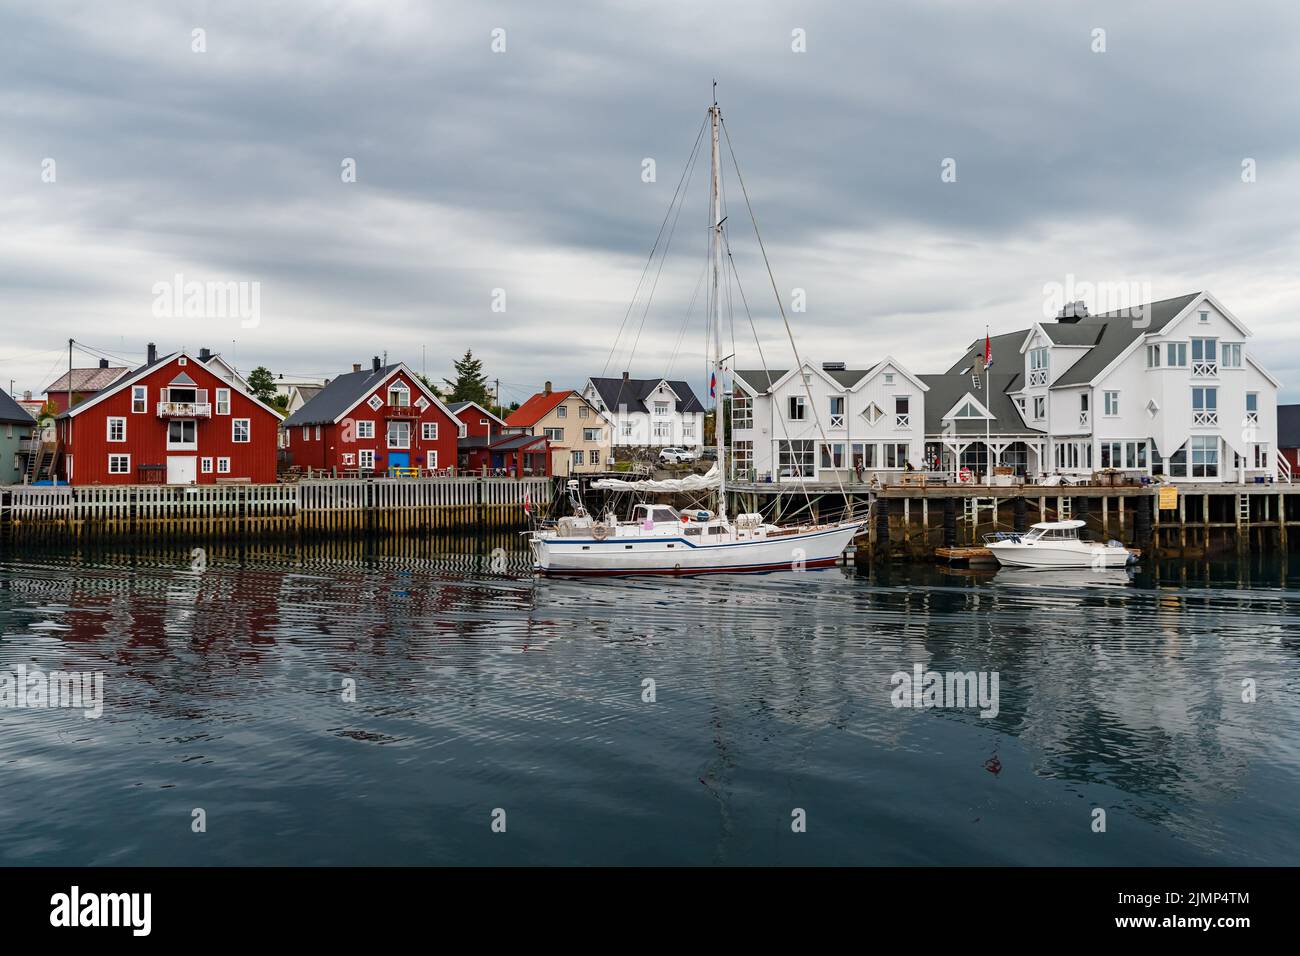 Norwegian seascape, cityscape of the town Henningsvaer, a small boat moves between peninsulas, sail boat, rocky coast with drama Stock Photo